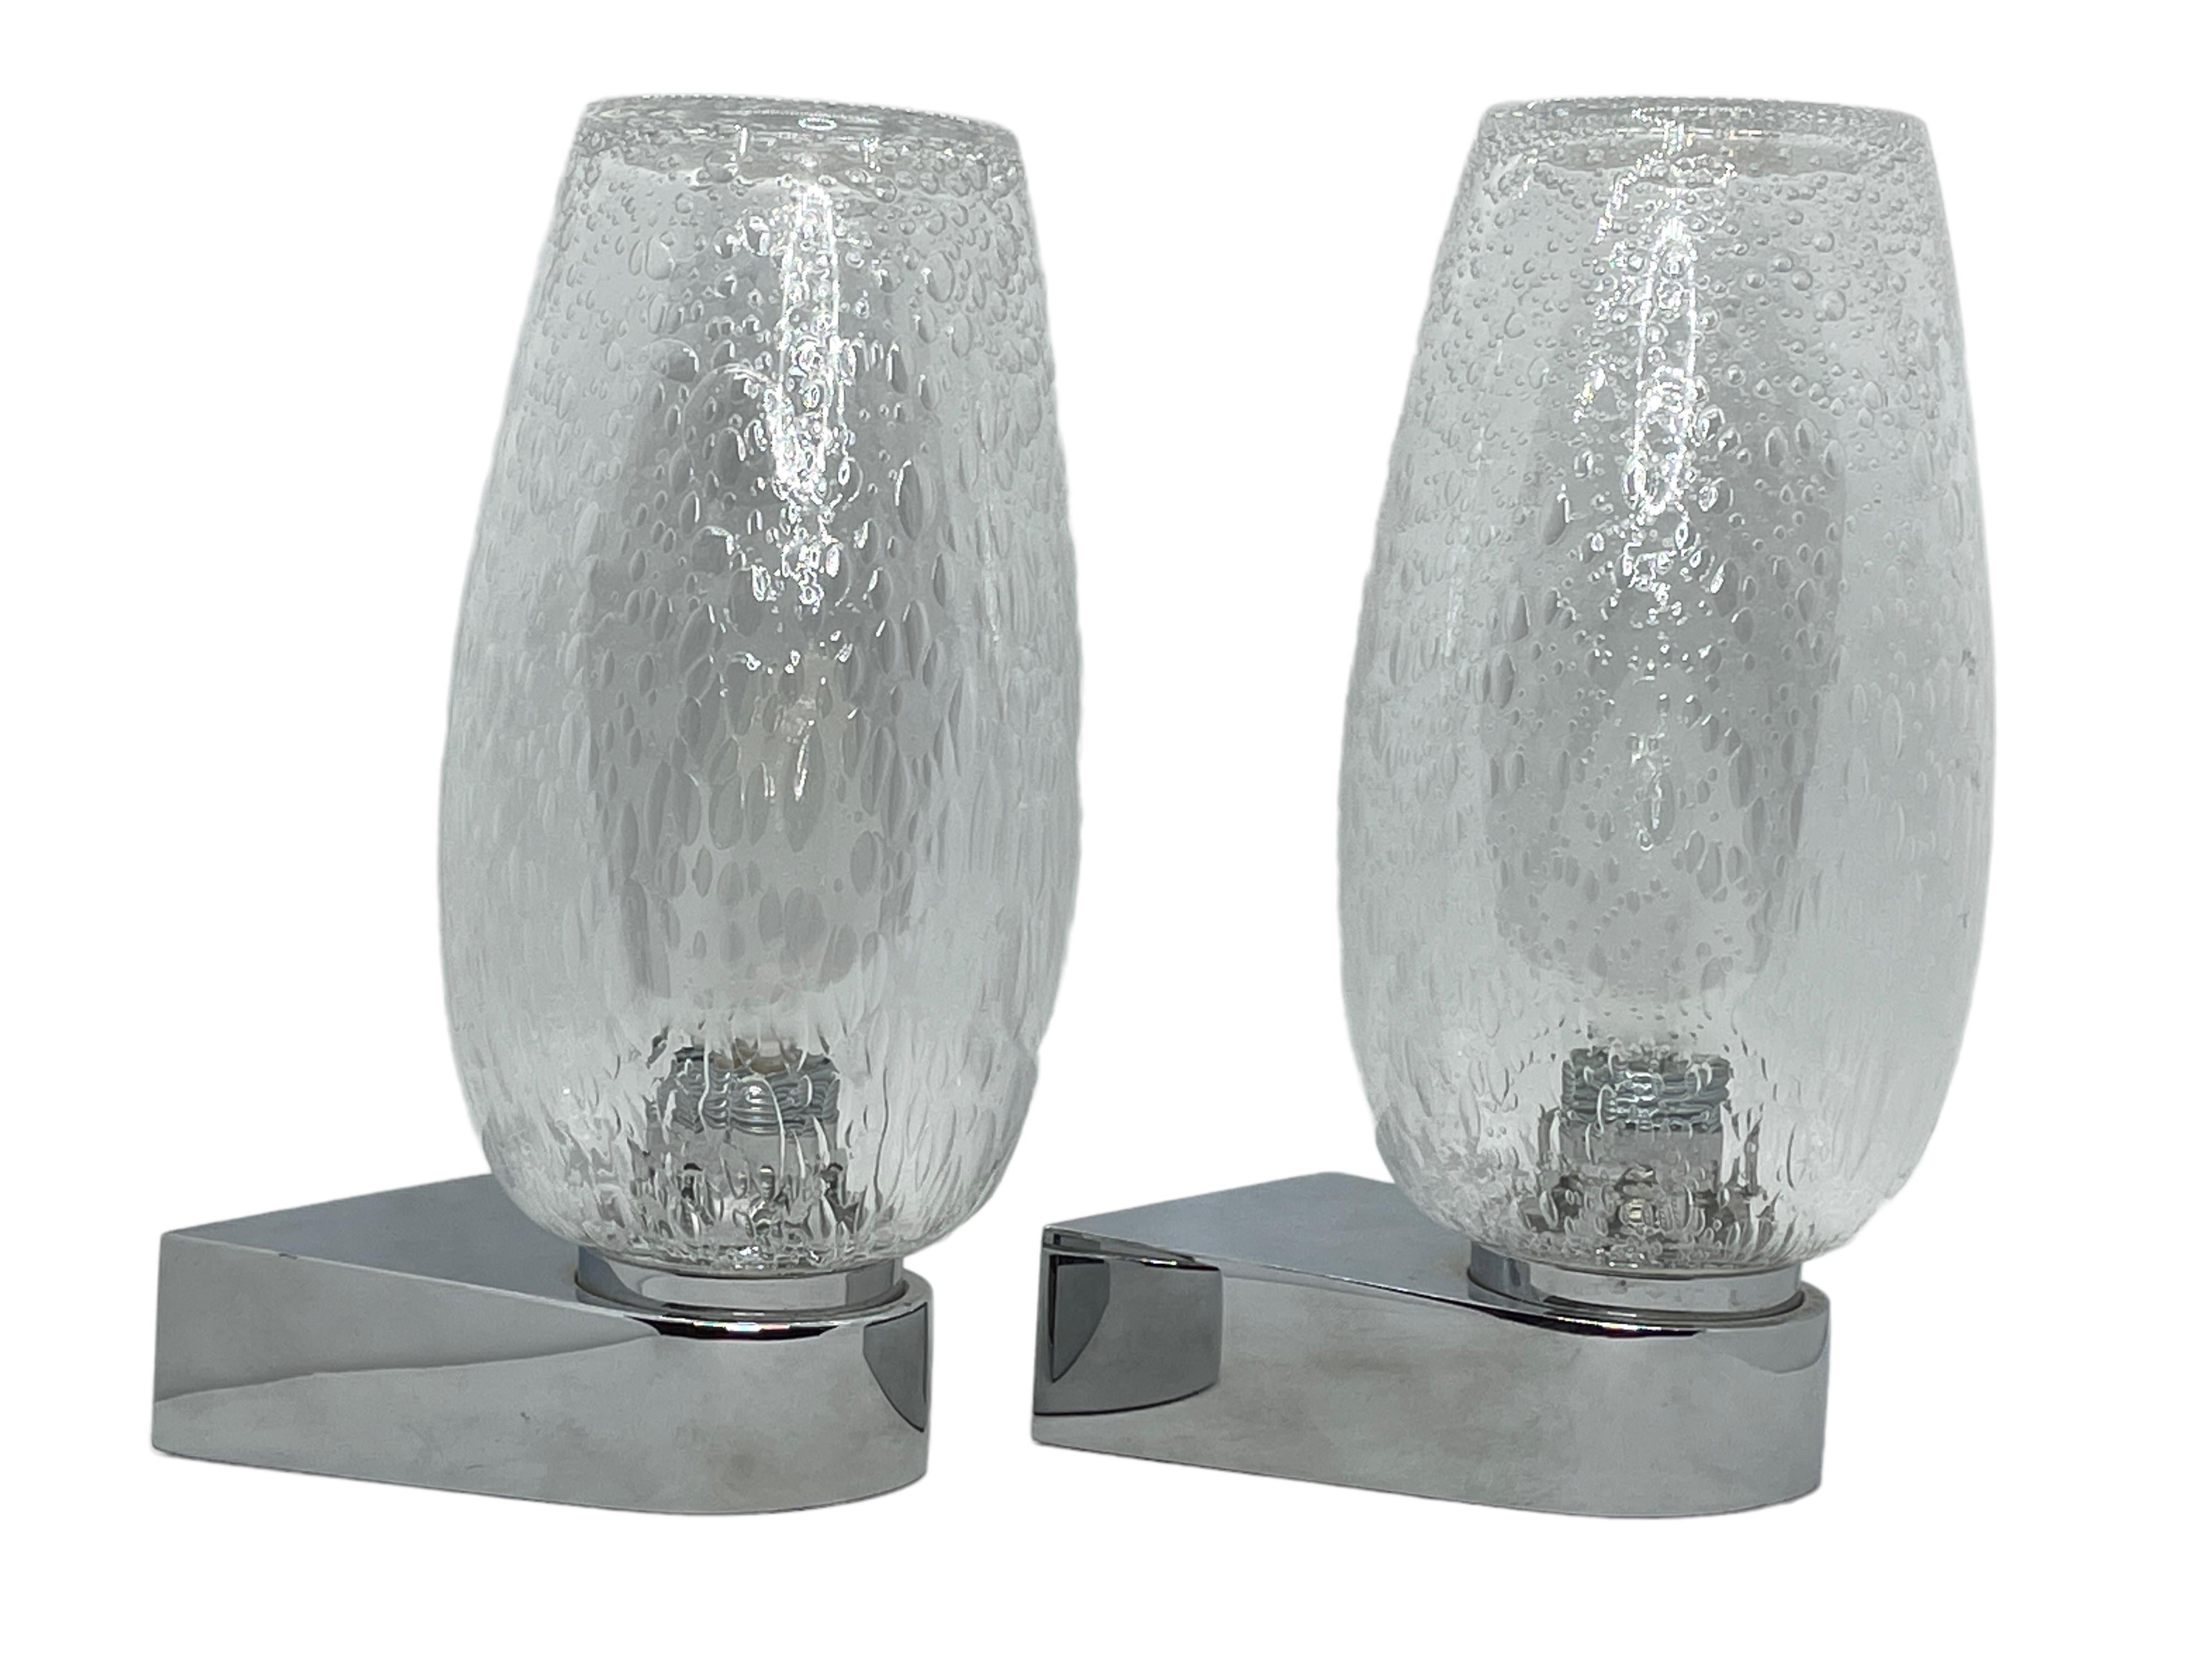 Pair of 1970s German Bubble Glass and Chrome Sconces, Vintage Mid-Century Modern For Sale 3